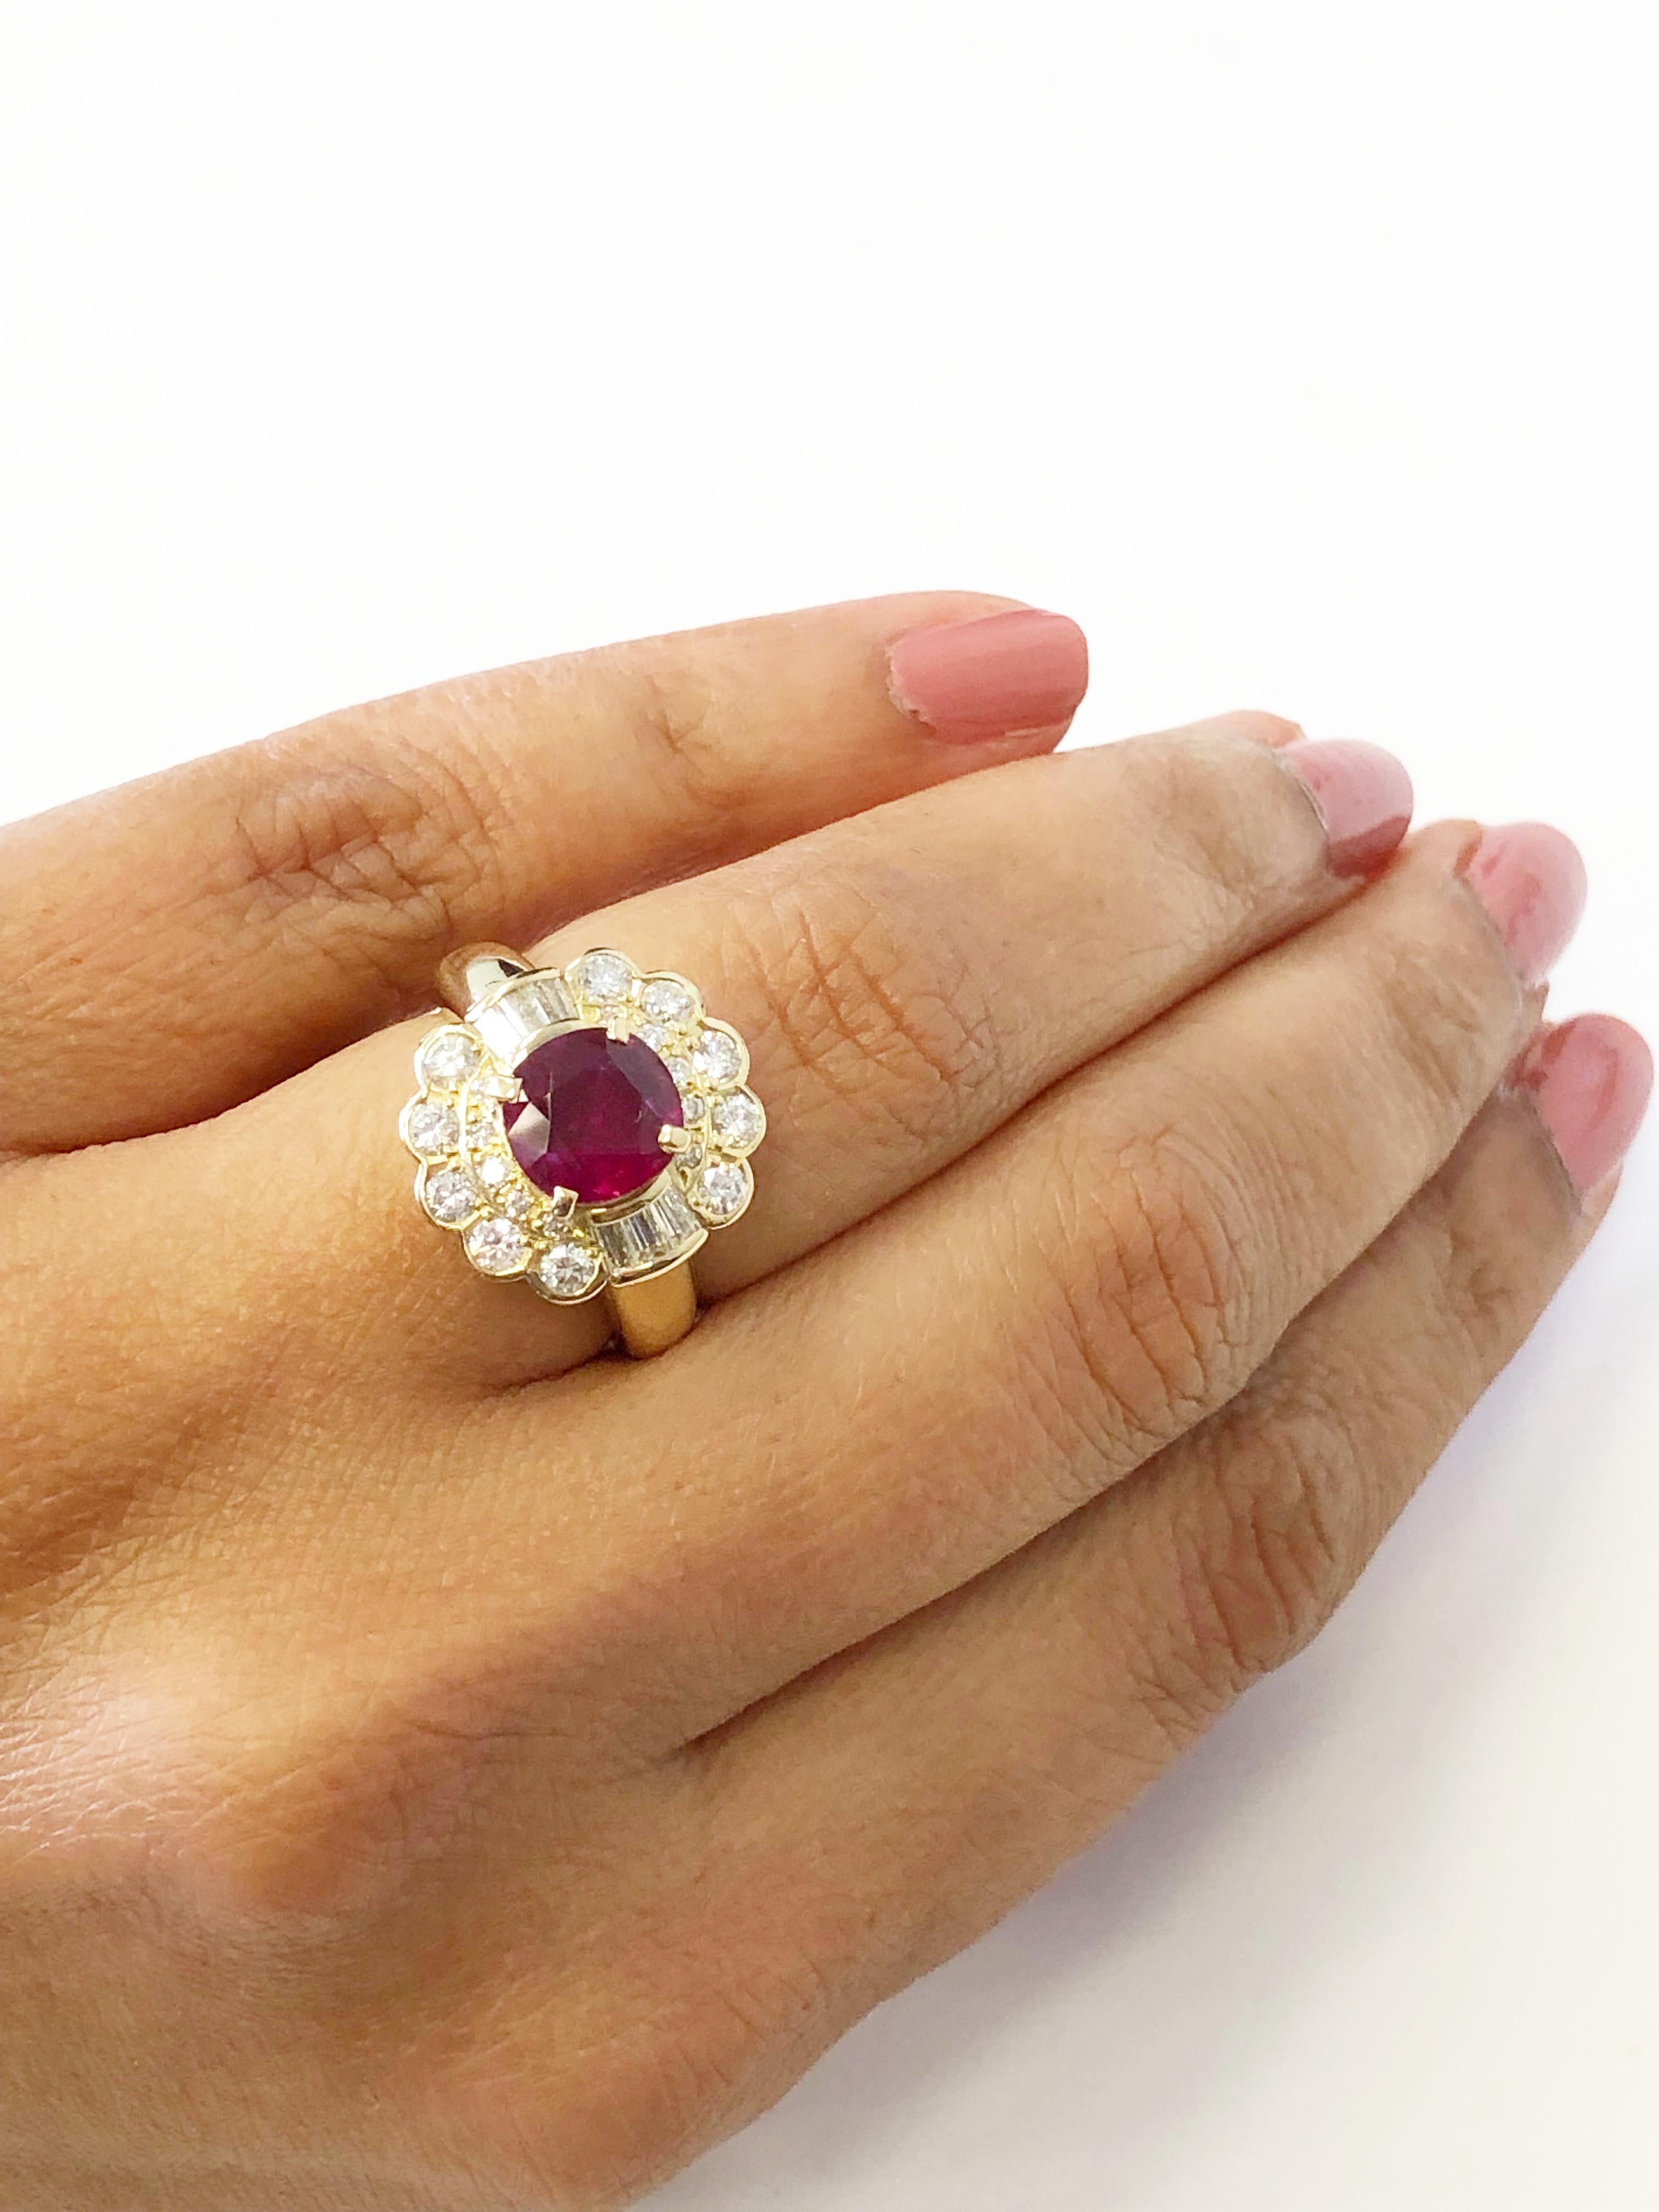 Gorgeous deep red round ruby weighing 2.13 carats with 0.87 carats of good quality white diamond rounds and baguettes.  Handcrafted 18k yellow gold mounting in size 6.  A perfect ring for everyday or a special night out.

